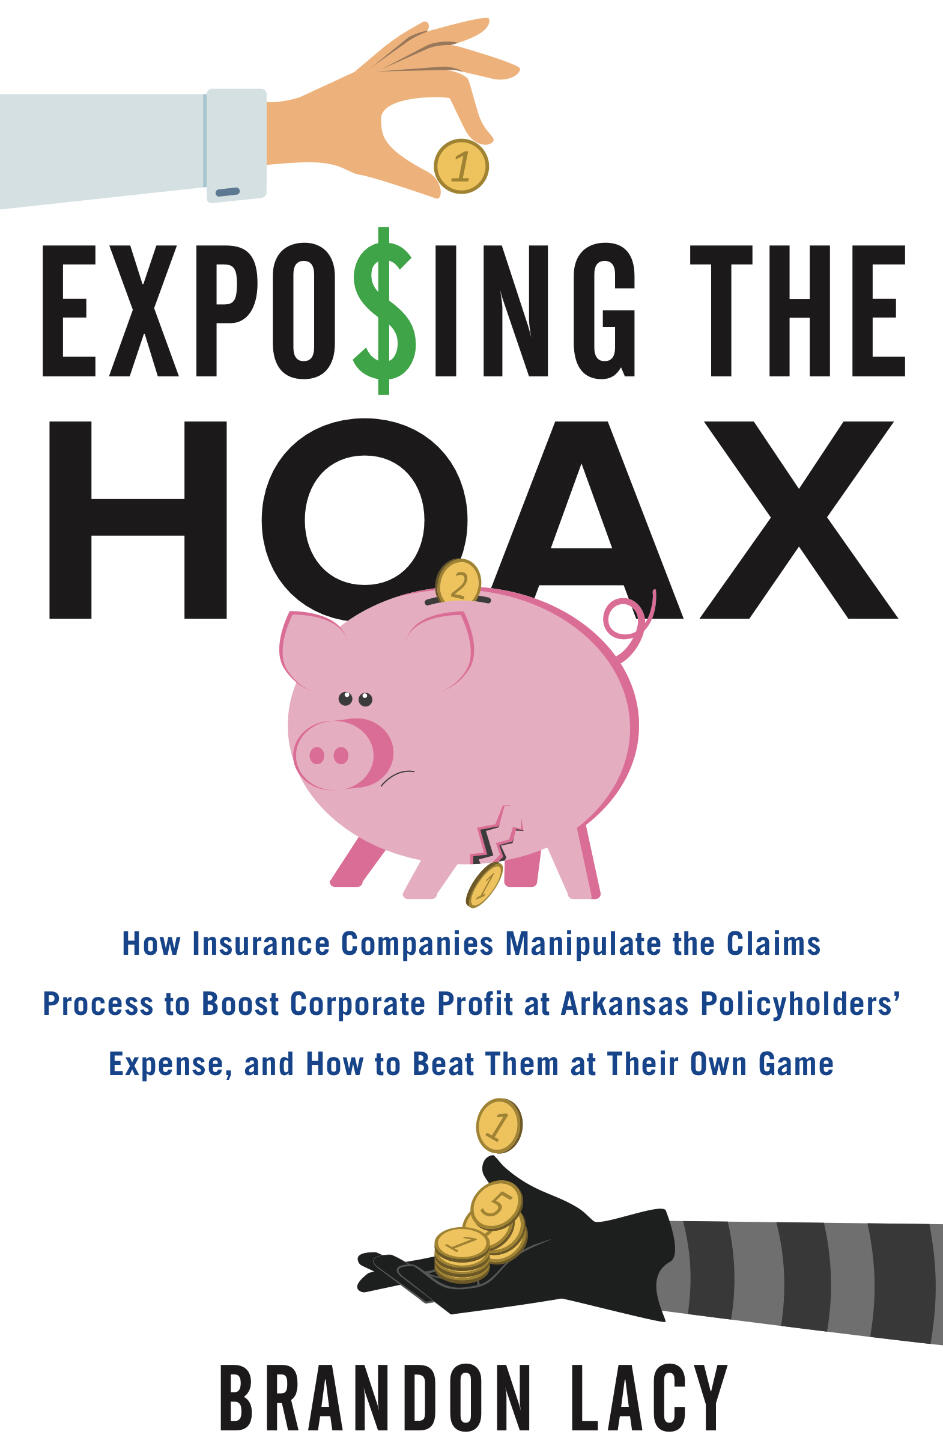 Exposing the Hoax